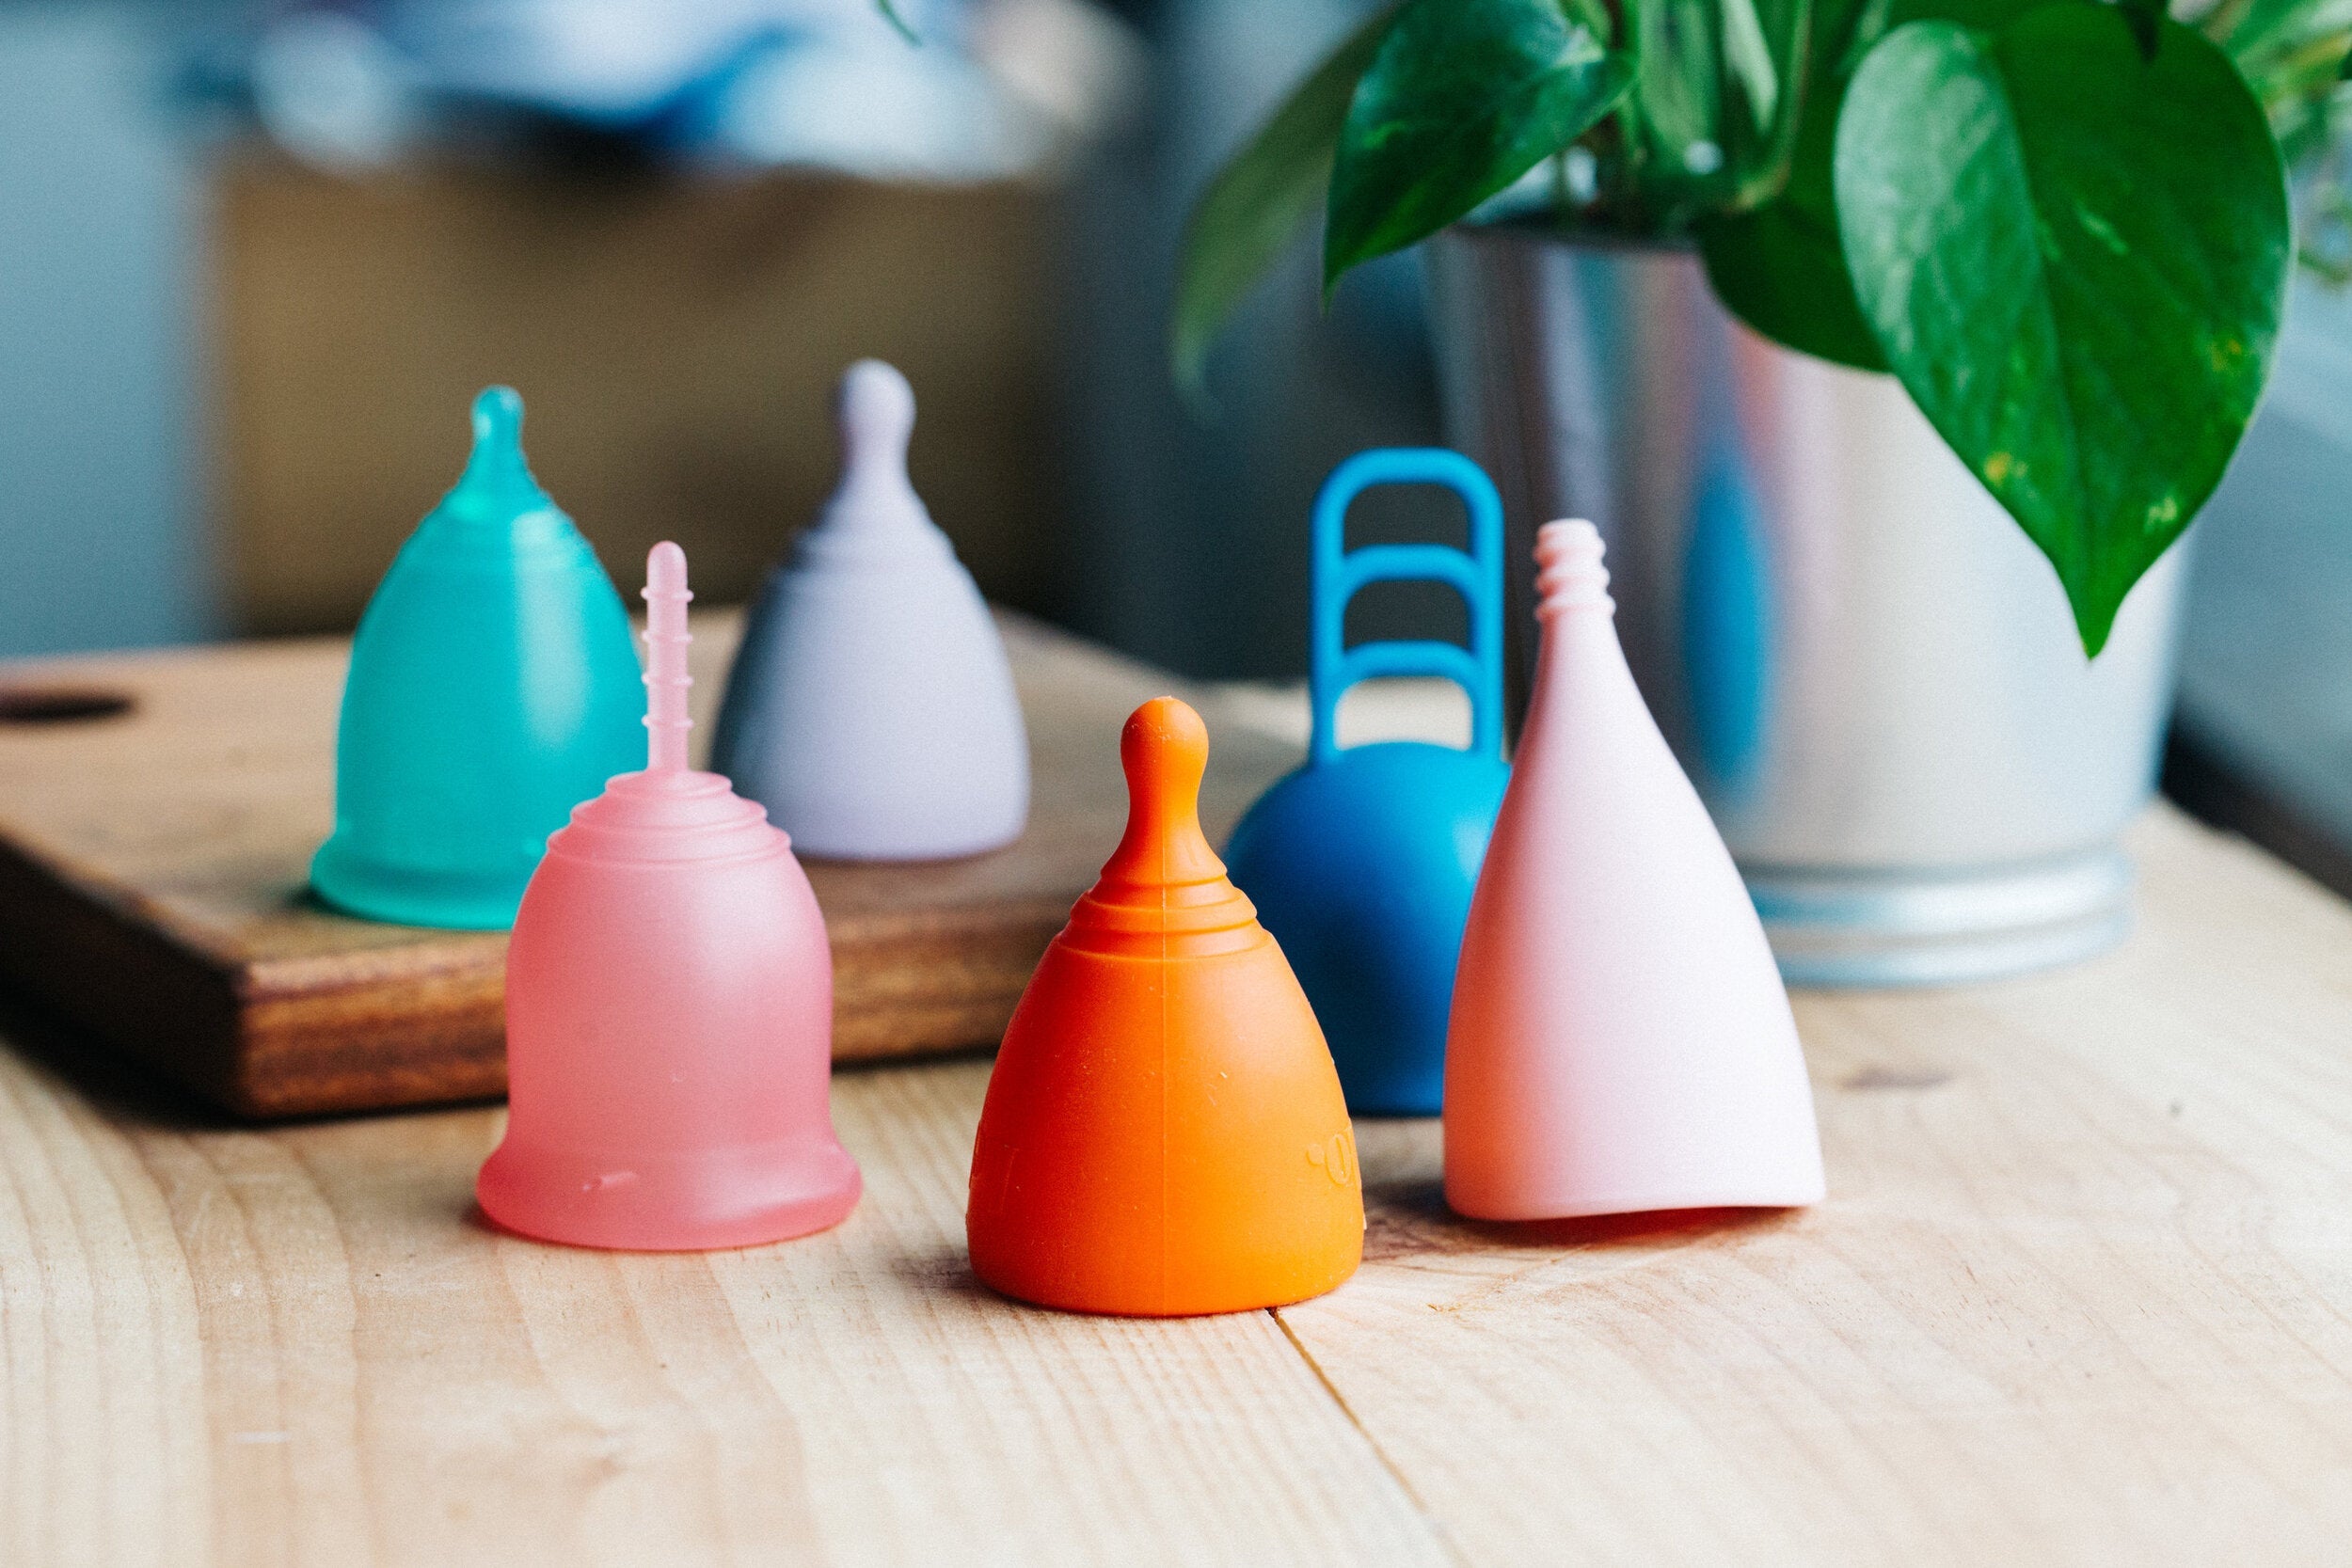 Take Control of Your Periods - Menstrual Cups & More | The Green Collective SG